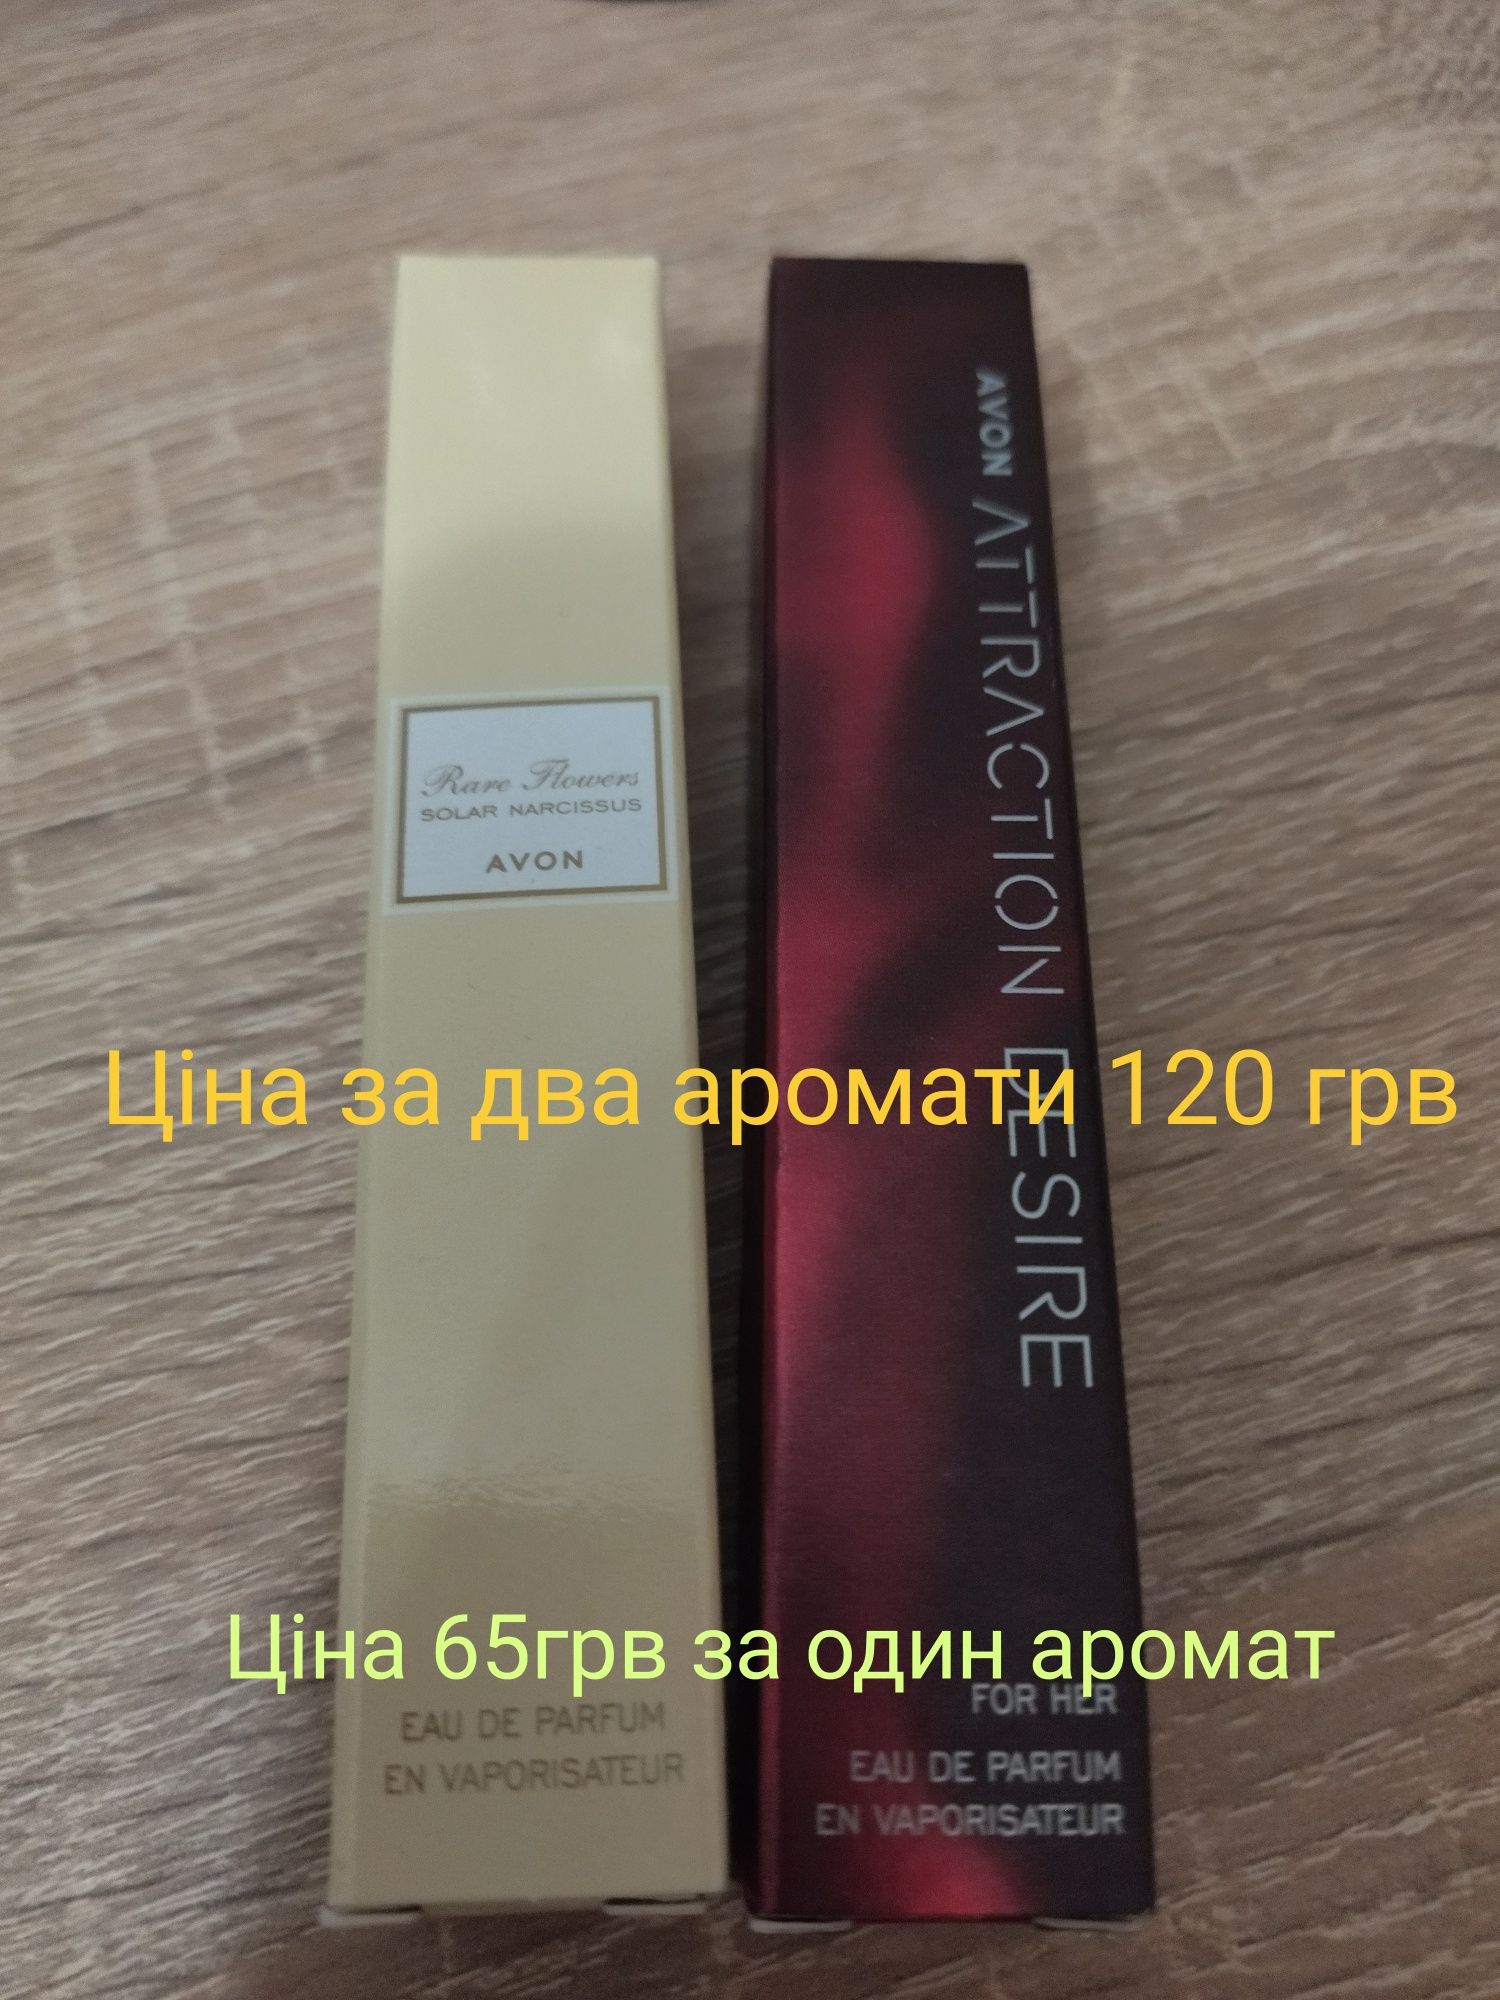 Collections Summer Mania 
Туалетна вода Avon Collections Summer
Ту